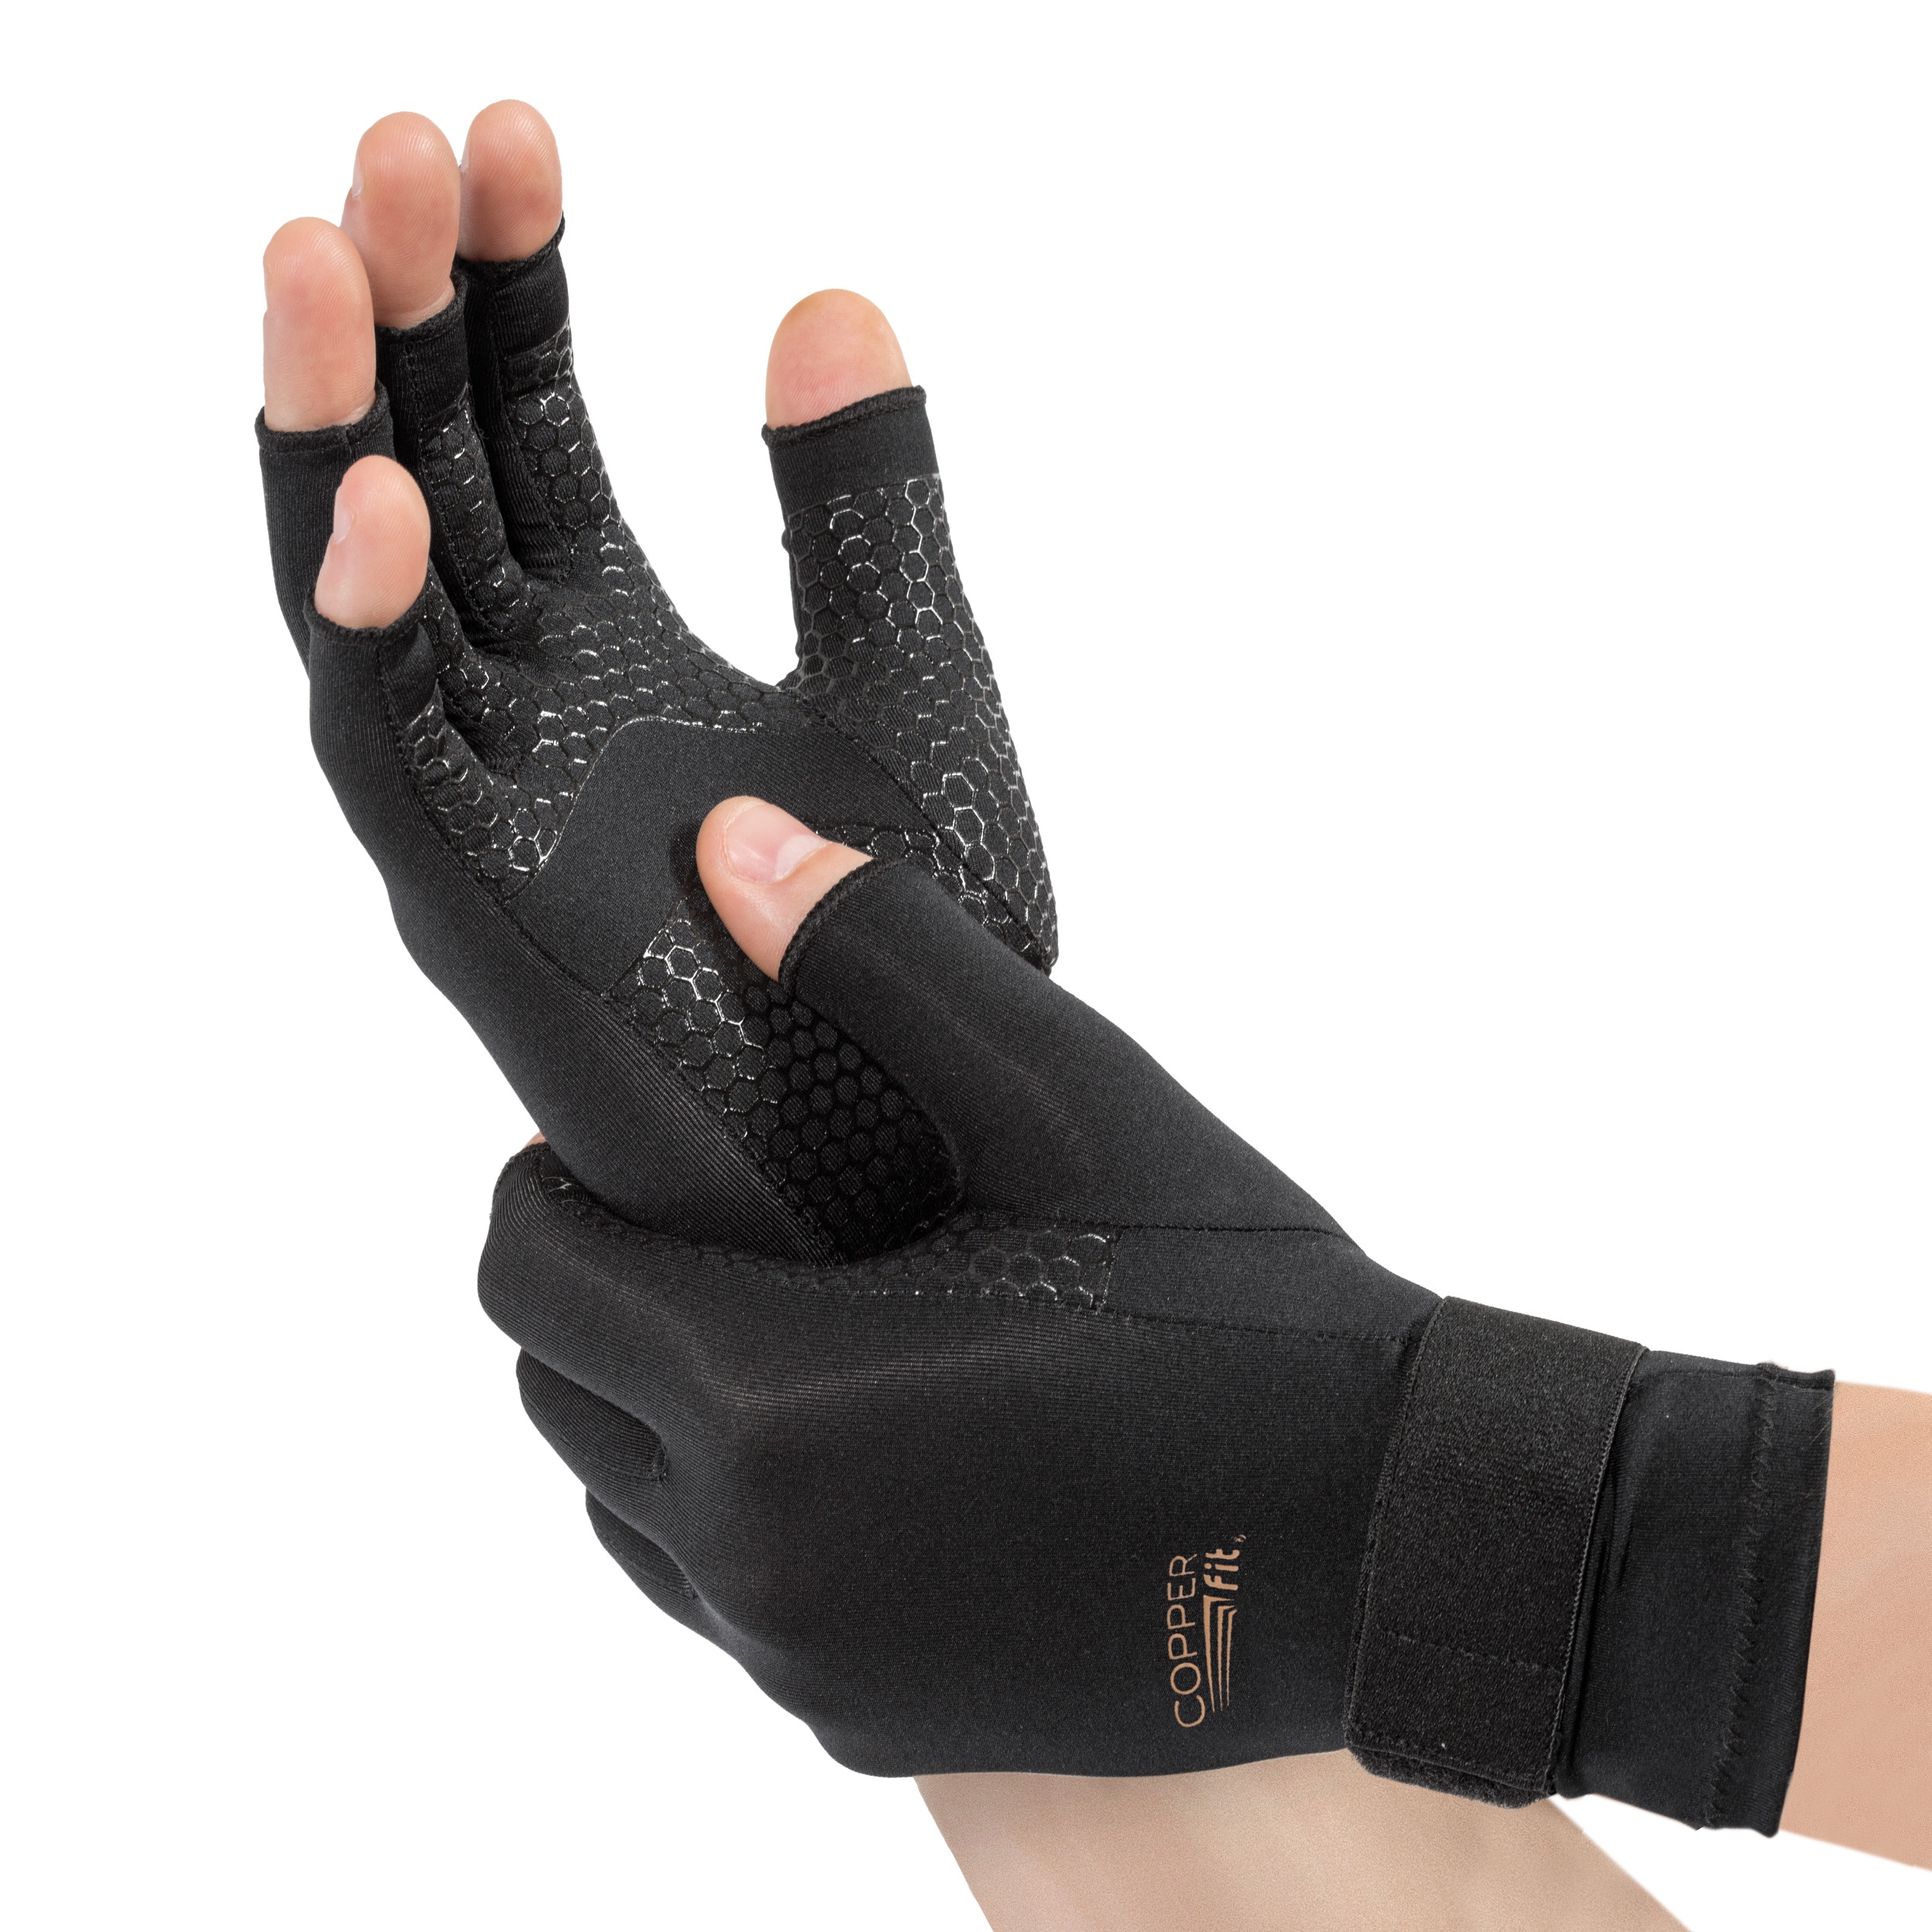 Copperfit Sport Wrist Brace Support Review, Likes and Dislikes